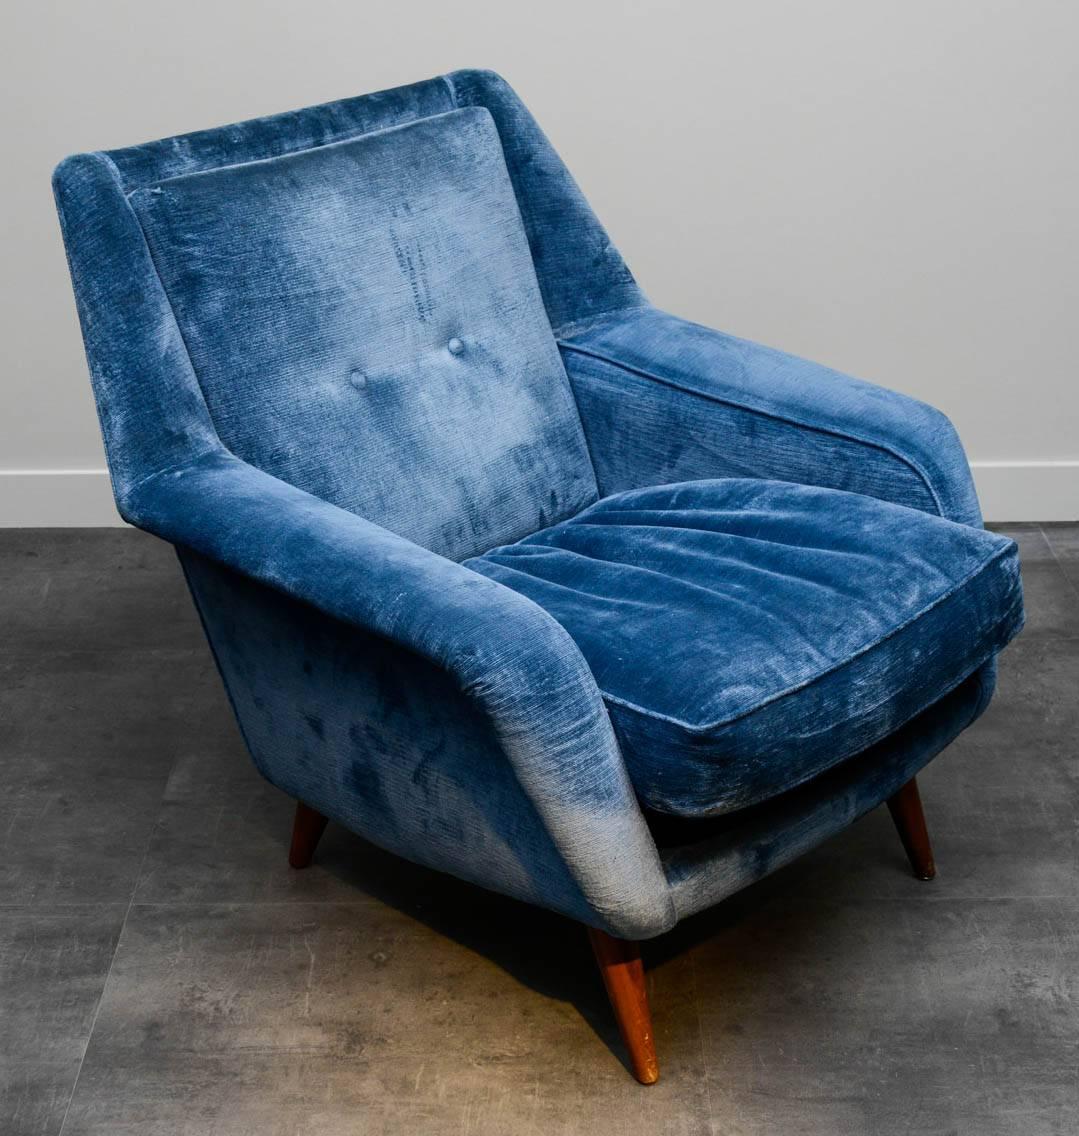 Vintage salon suite in blue velvet including a three-seat sofa and a pair of armchairs; cushions on back and seat, legs in wood.
Dimensions of the sofa: 187 X 70 X H 78 cm x Seat Height 40 cm.